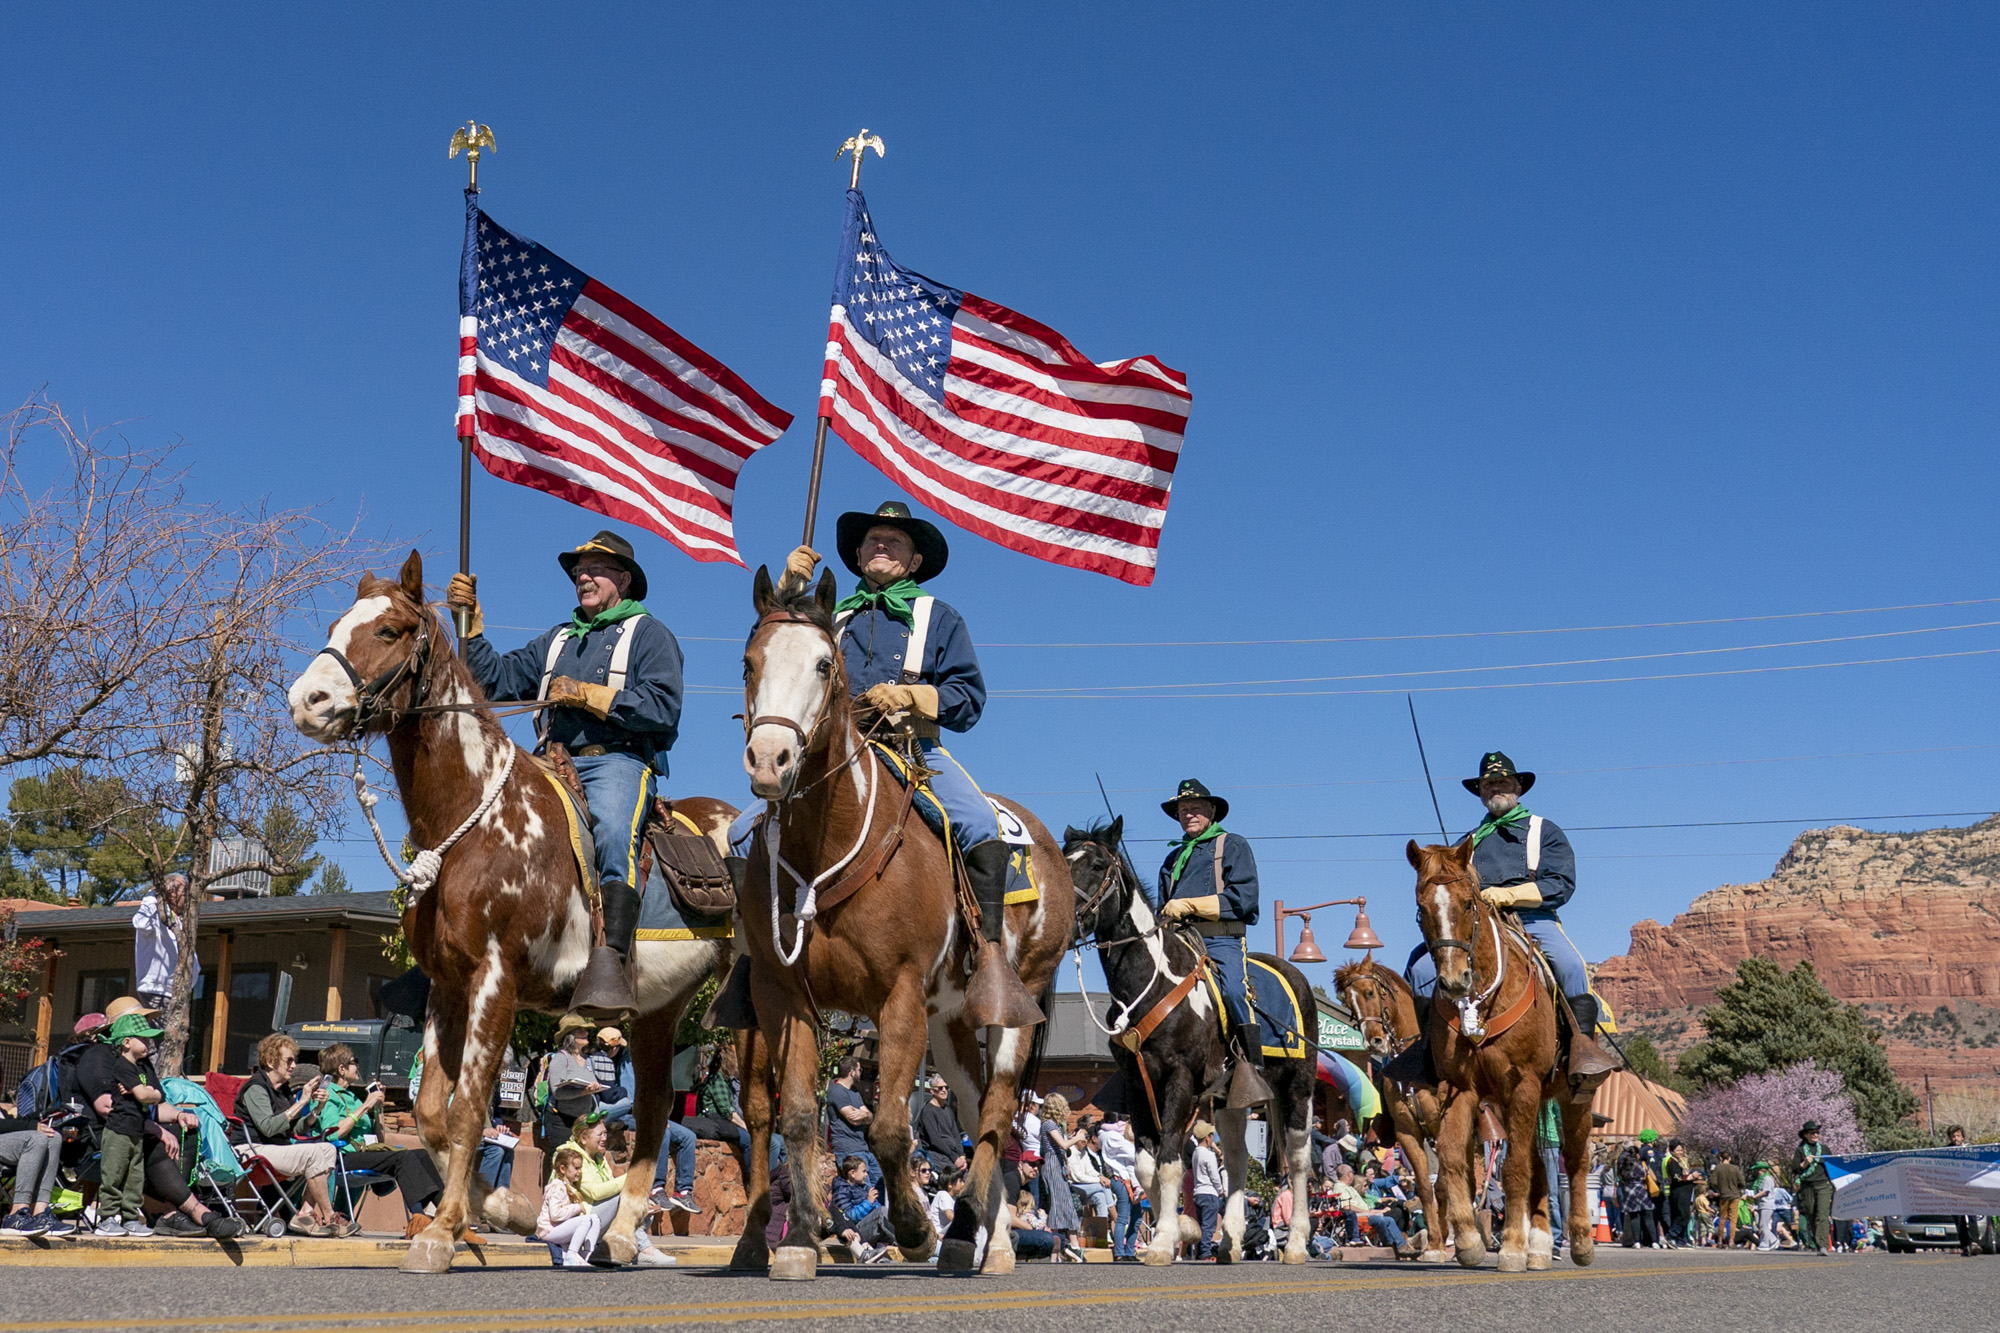 Enjoy St. Patrick’s Parade in Uptown Sedona on Saturday, March 18